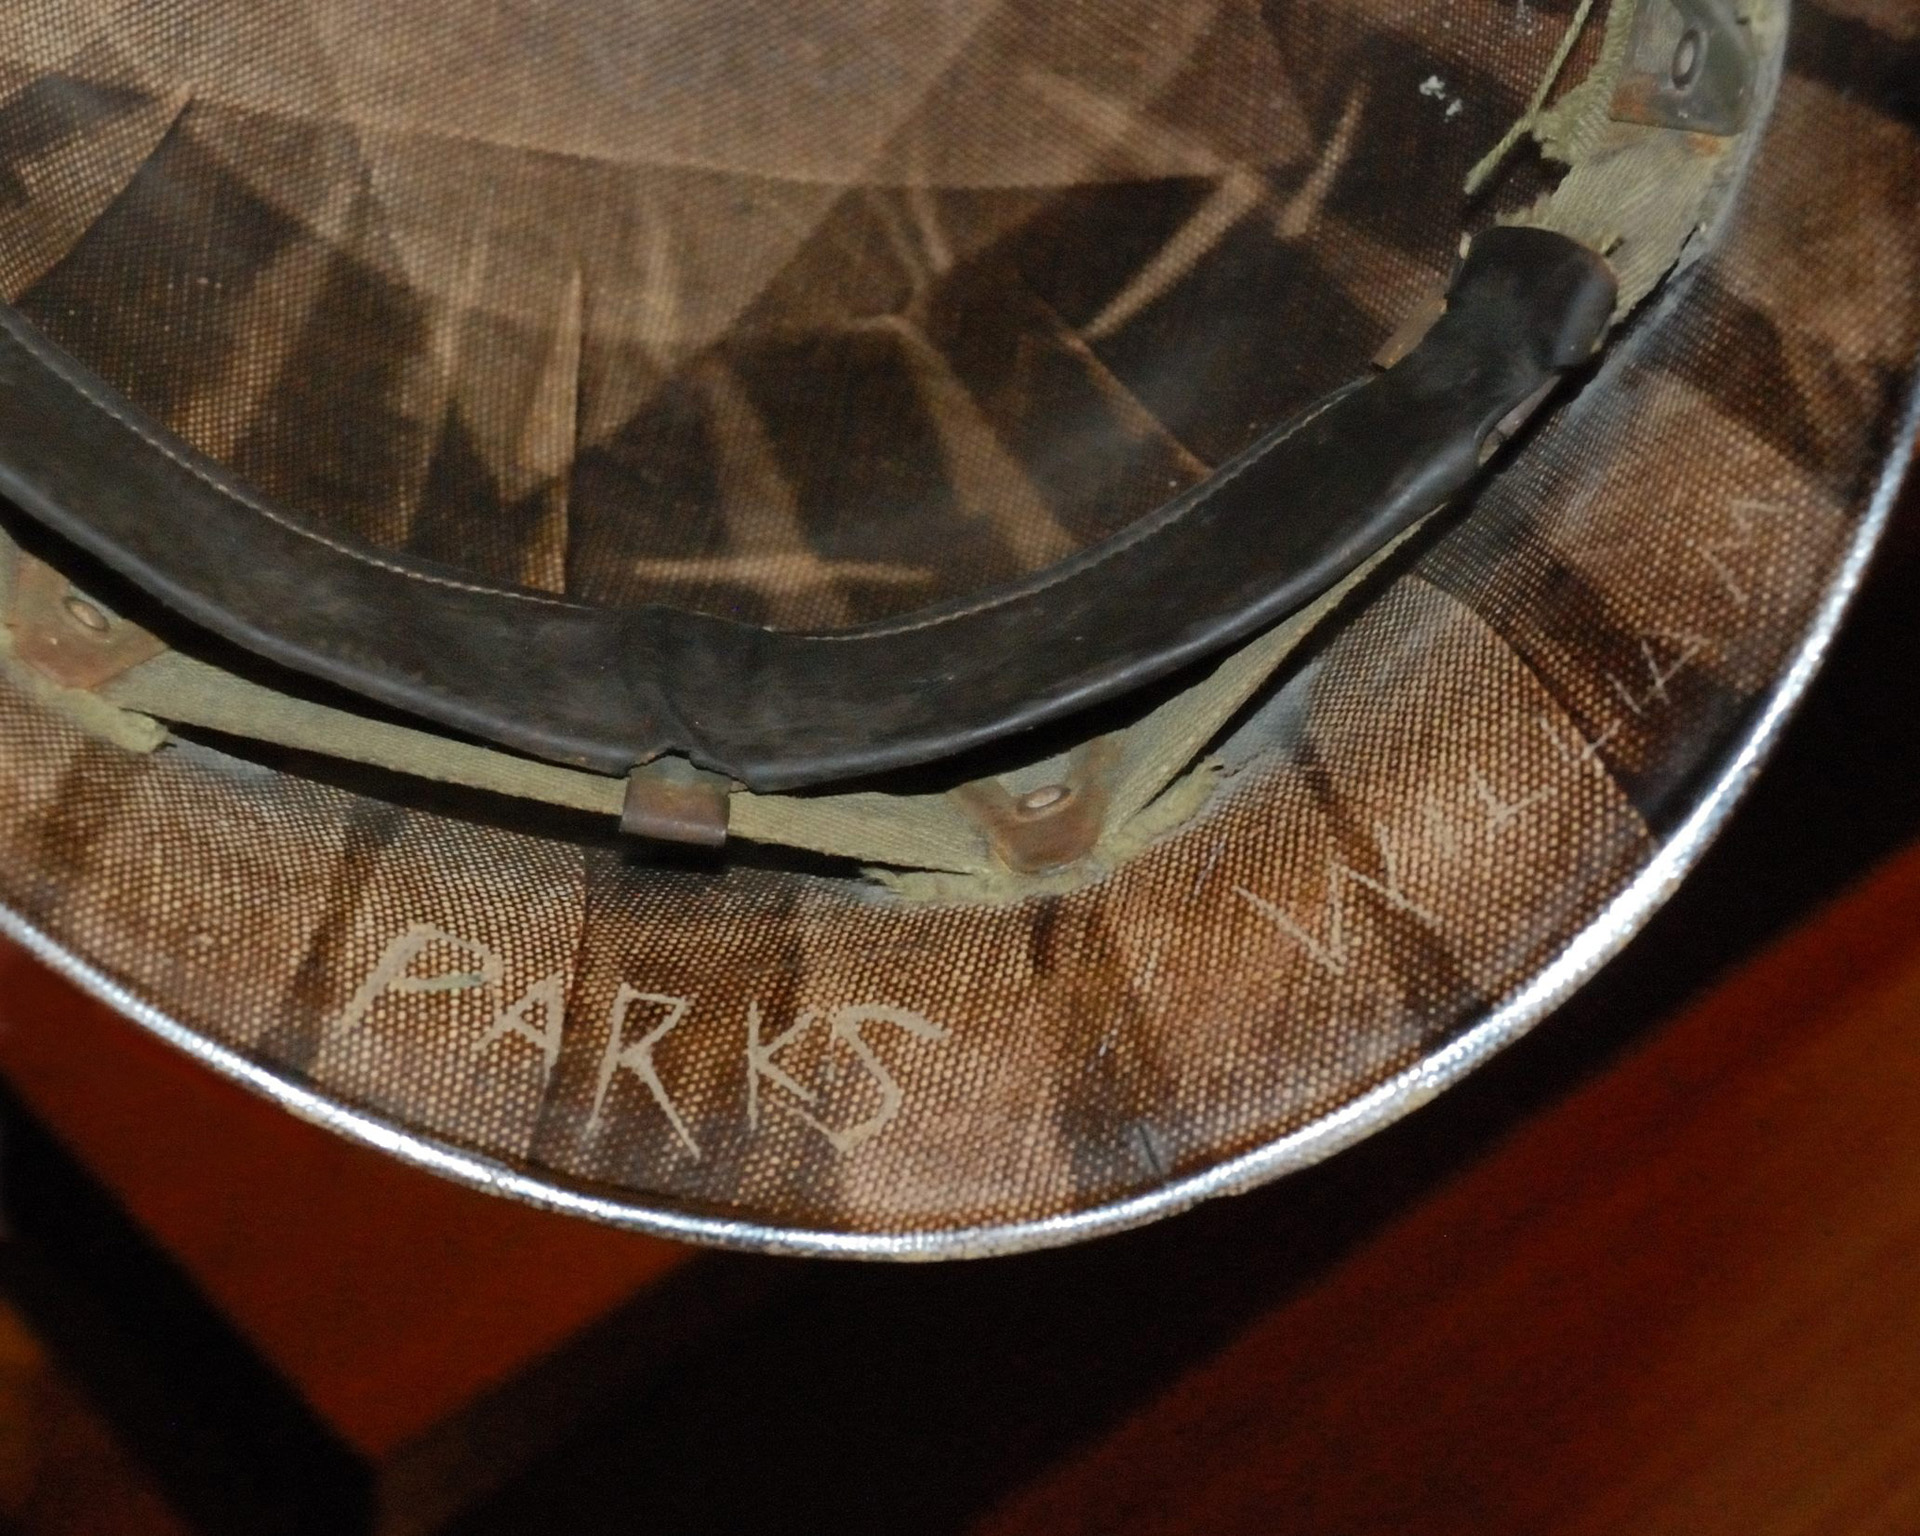 “Parks William” is visibly etched inside the helmet liner that Parks lost during the Battle of the Bulge in 1944.  Parks died in 1993, but the lost artifact was eventually presented to his family.